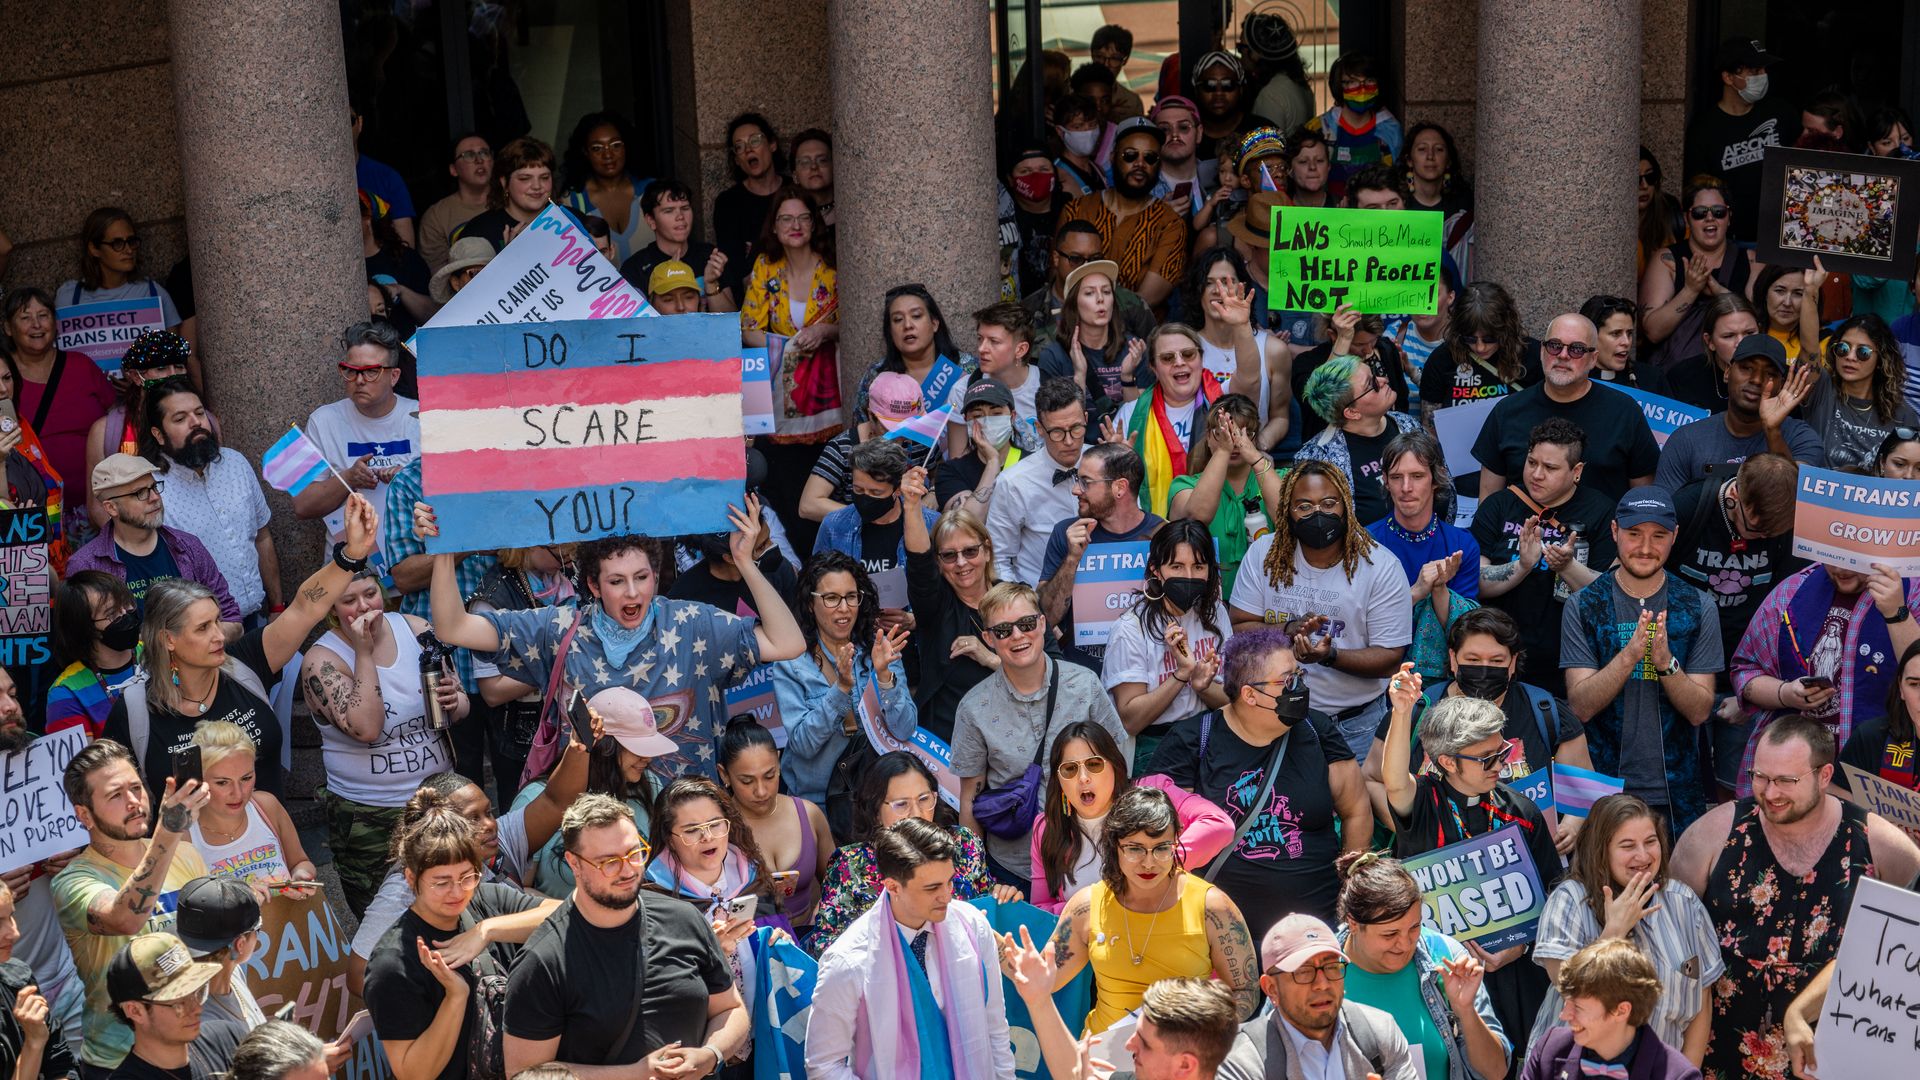 People protest bills HB 1686 and SB 14 during a 'Fight For Our Lives' rally at the Texas State Capitol on March 27, 2023 in Austin, Texas. 